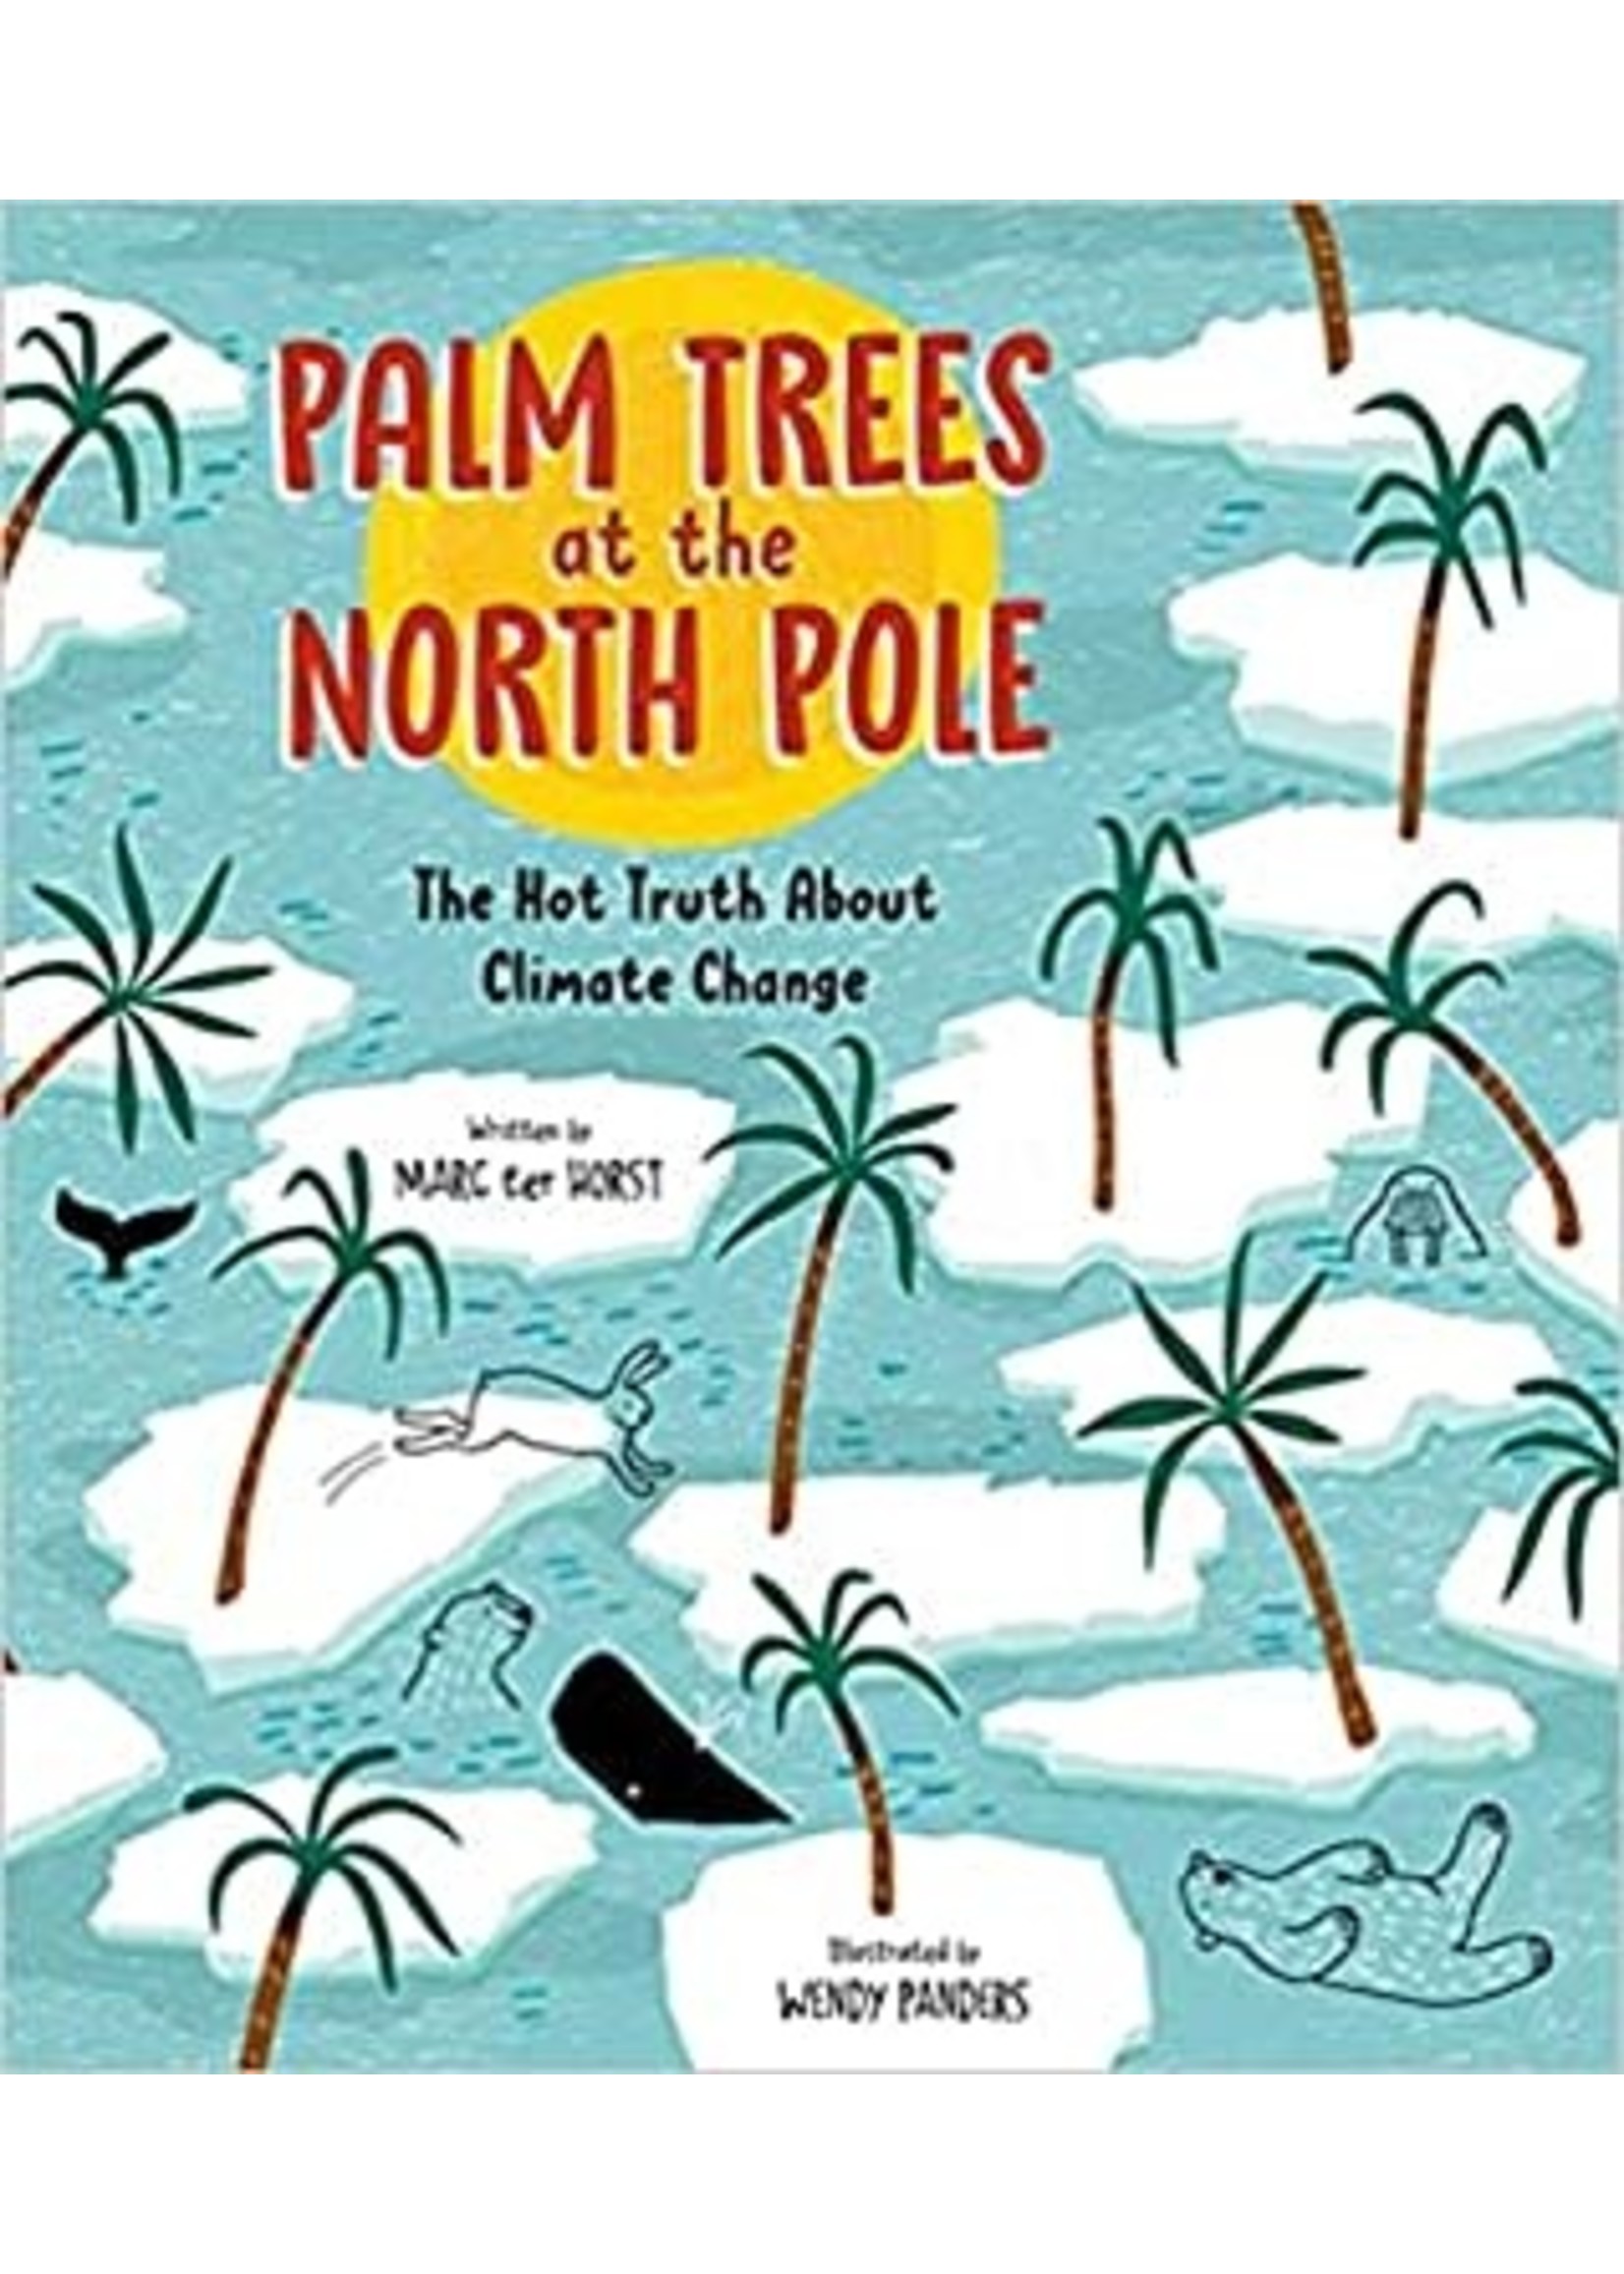 Palm Trees at the North Pole: The Hot Truth About Climate Change by Marc her Horst, Wendy Panders